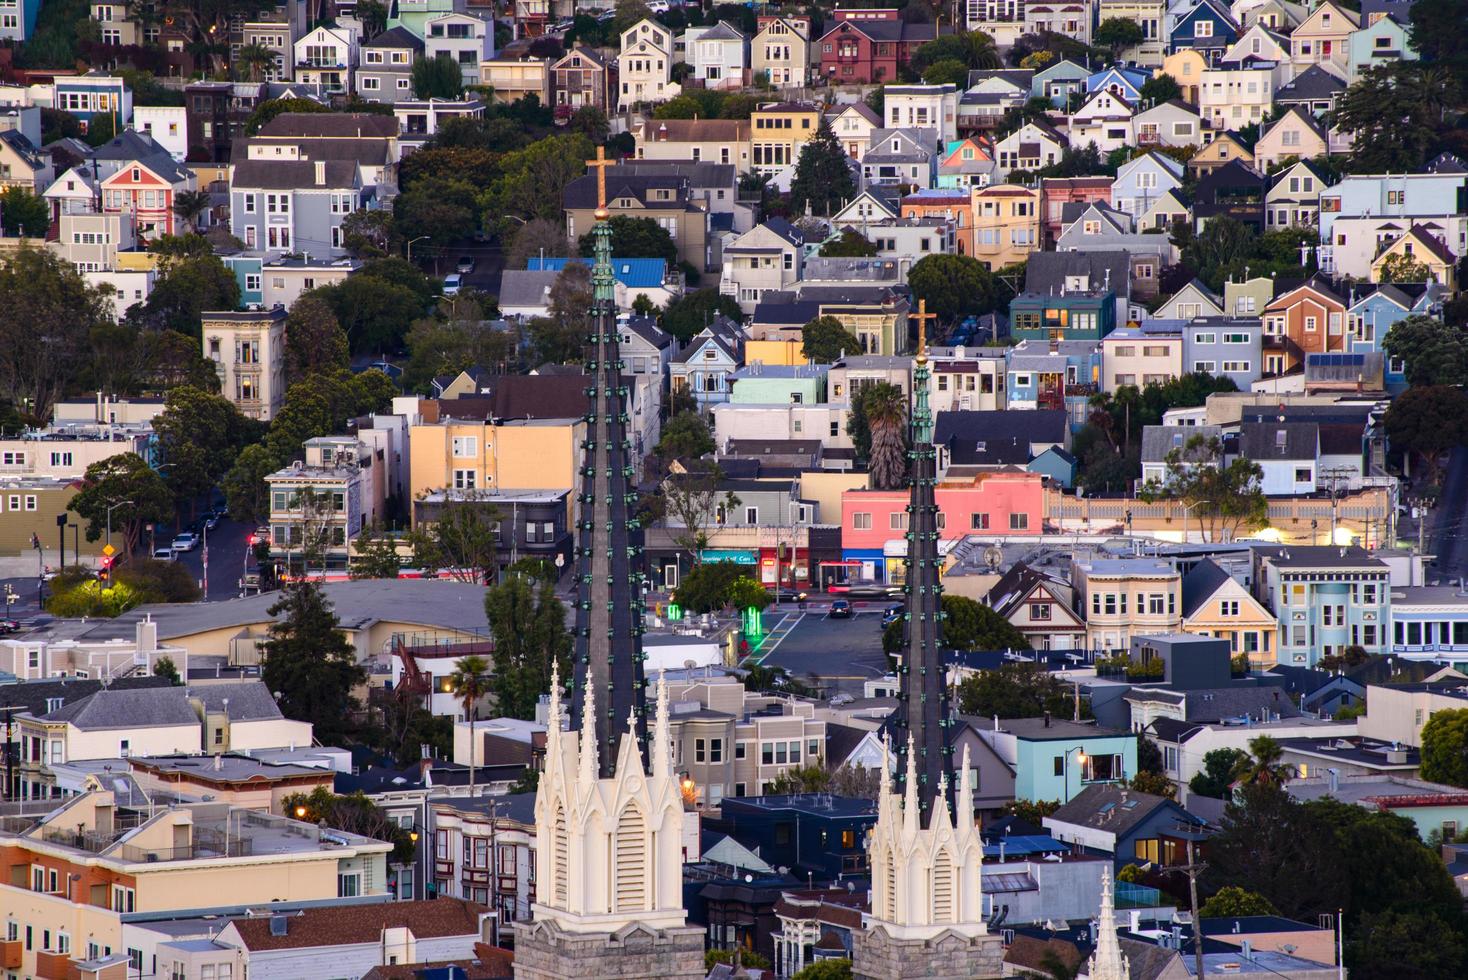 Golden hour neighborhood hill view of San Francisco homes, peaked roofs - colorful and scenic with some Victorian homes - a typical San Francisco view. photo